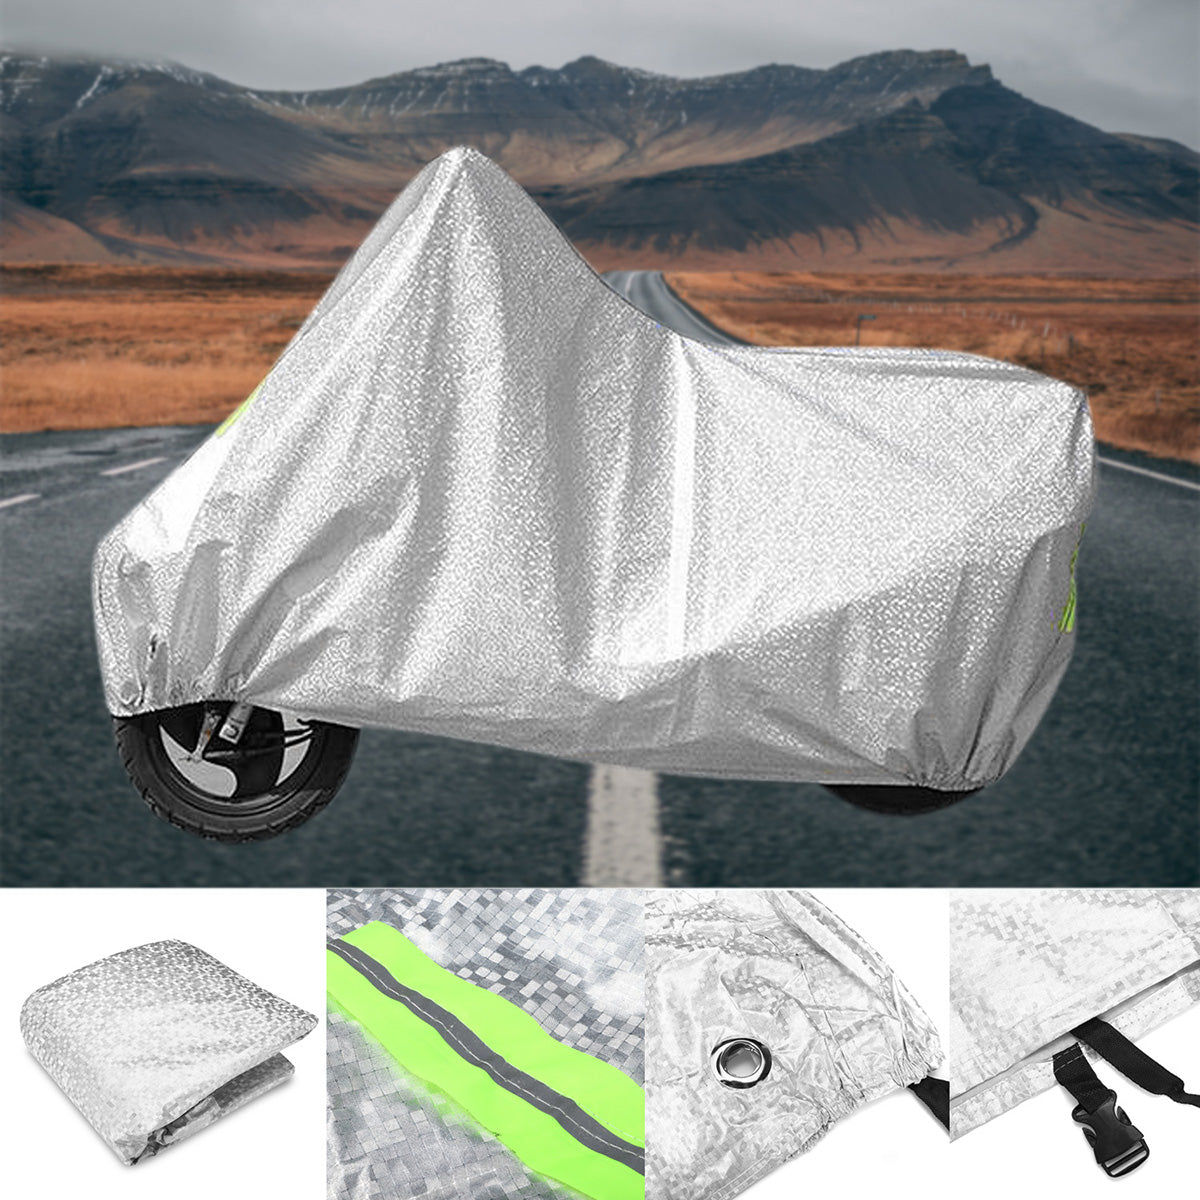 Lavender Motorcycle Protector Cover Rain Dust Waterproof Nylon Sheet Motorbike With Reflective Strip